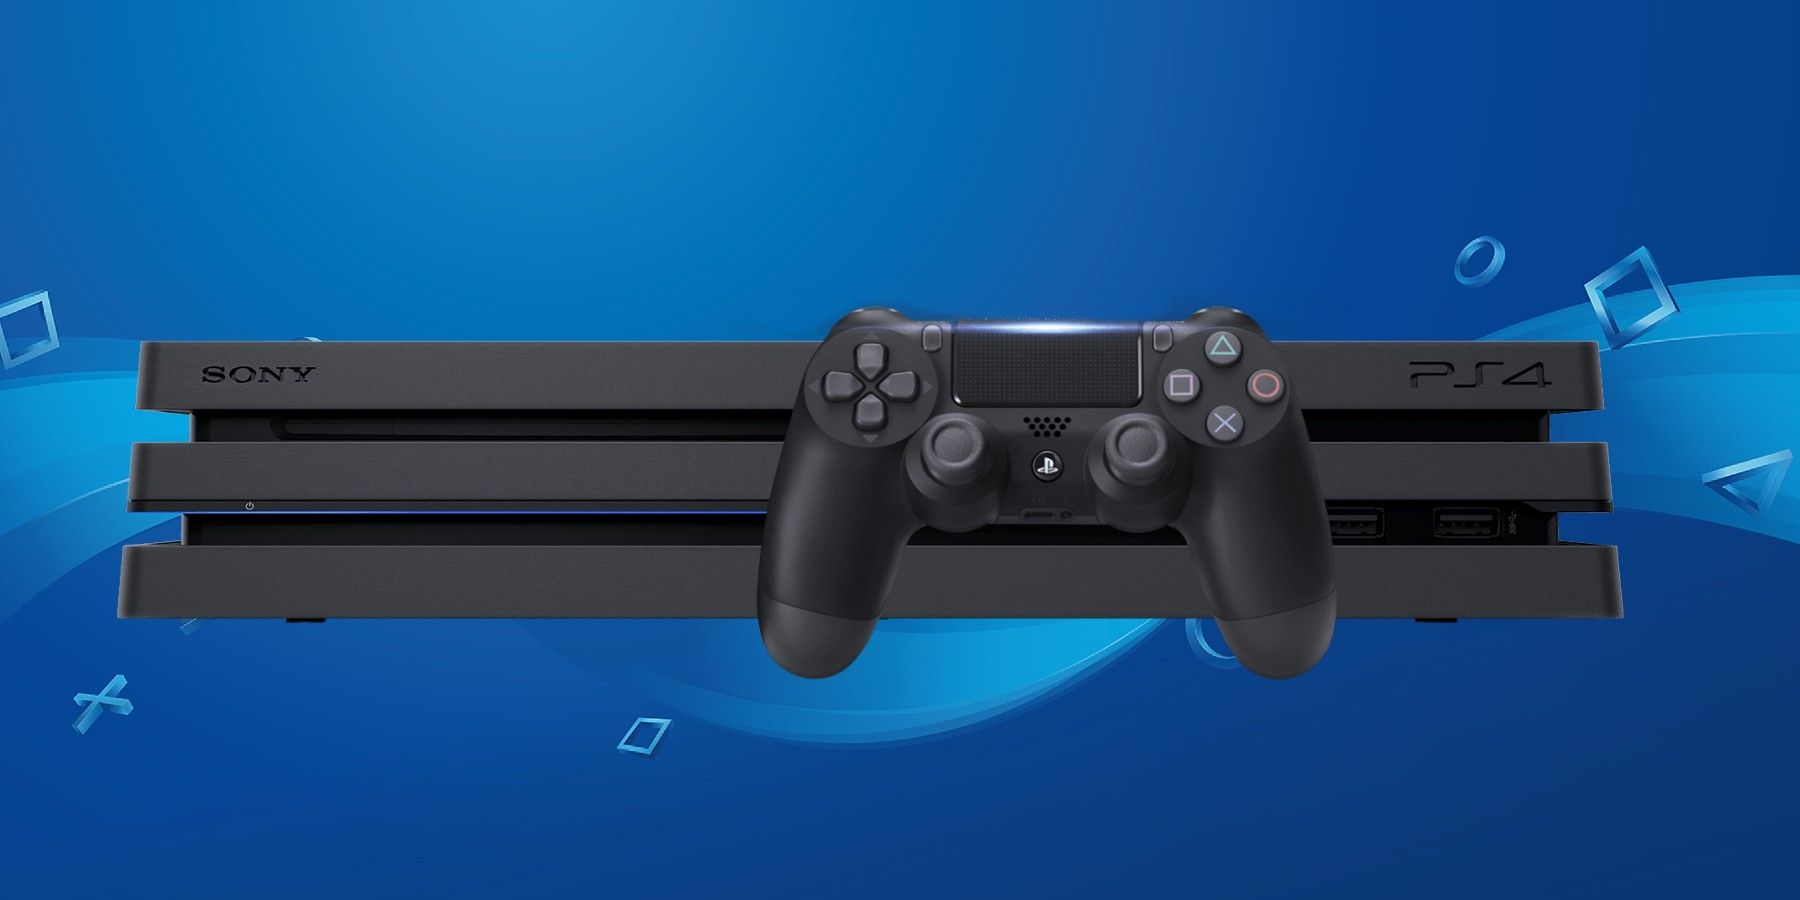 Sony reportedly discontinuing few PS4, PS4 Pro models